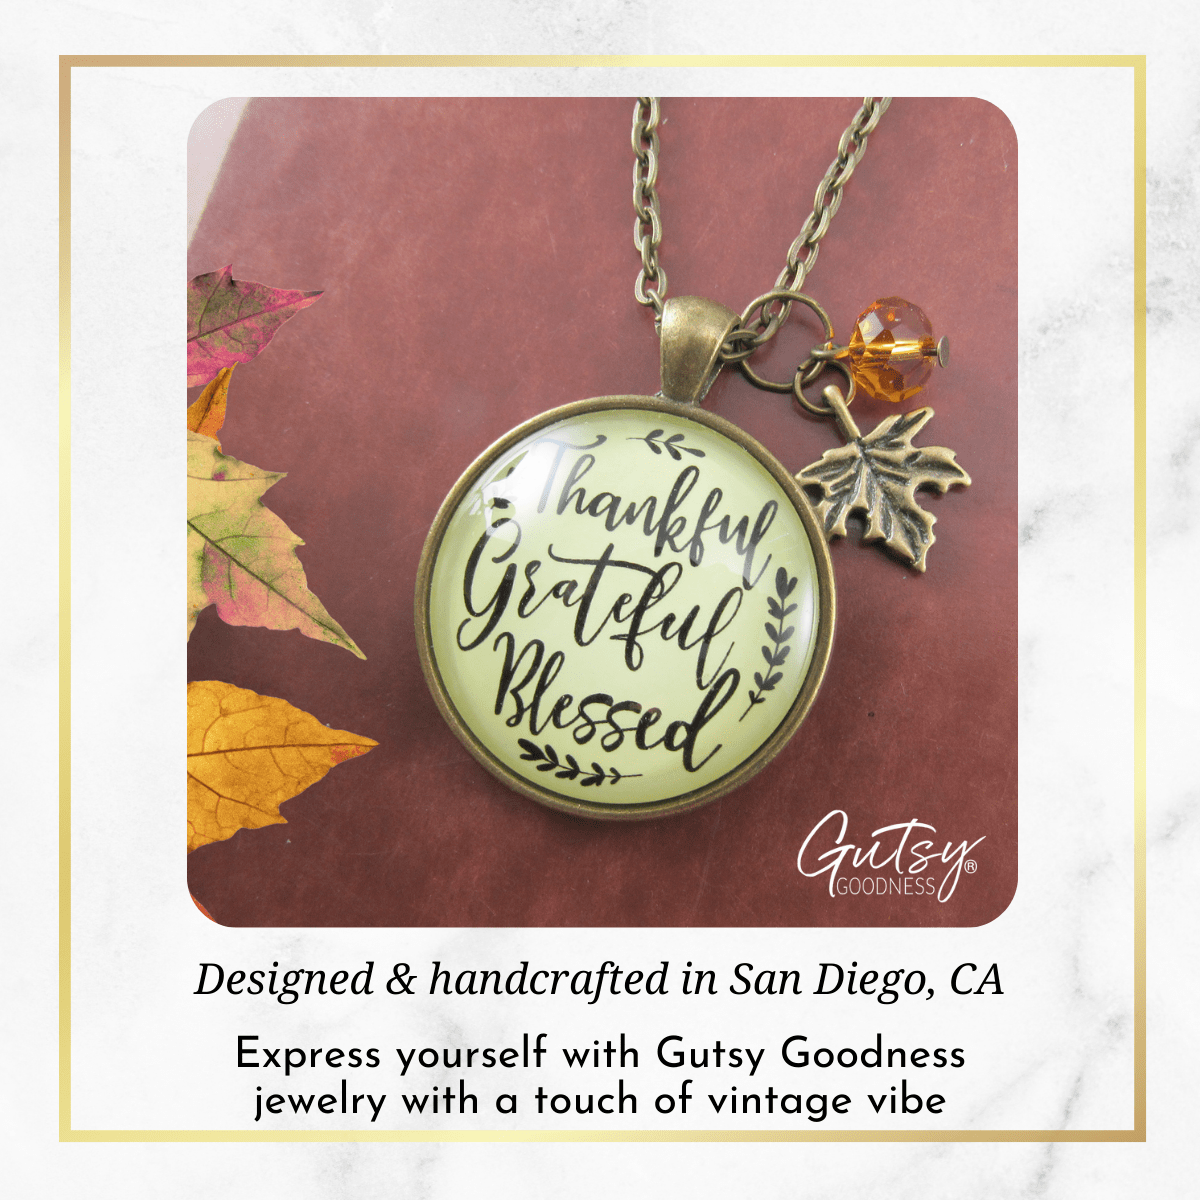 Gutsy Goodness Autumn Necklace Thankful Grateful Blessed Inspirational Leaf Jewelry - Gutsy Goodness Handmade Jewelry;Autumn Necklace Thankful Grateful Blessed Inspirational Leaf Jewelry - Gutsy Goodness Handmade Jewelry Gifts